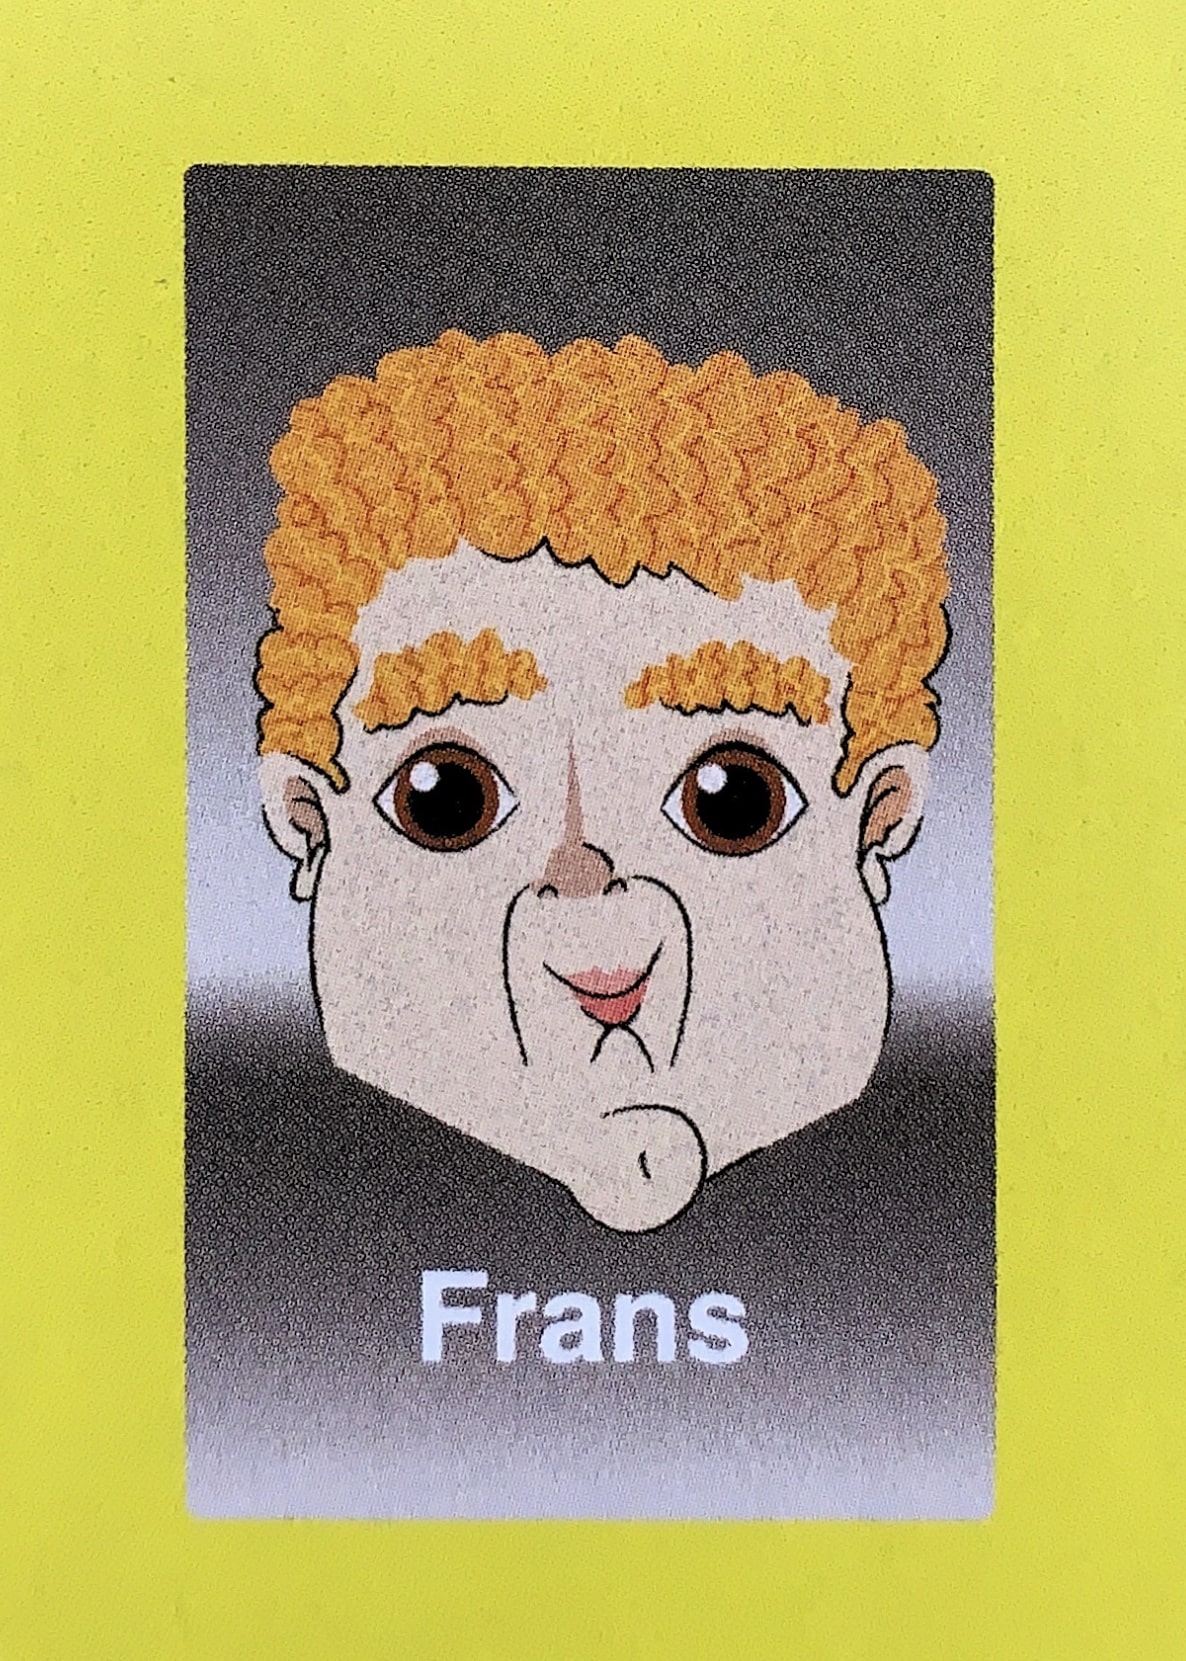  - The night before the photoshoot to forever capture Frans’s face as part of the Guess Who?® game, Frans was nervous. And, as a Berlin nightclub fanatic, when Frans got nervous, he did cocaine. Lot’s of it. Frans arrived at the Guess Who?® offices bright and early the morning of the photoshoot, still flying high. Unfortunately for Frans, cocaine (as well as high blood pressure) are both risk factors for stroke, and as you can see from the facial asymmetry on his card, he was having an active one while his picture was taken. He required extensive rehabilitation, and still suffers from permanent deficits. He couldn’t continue onto the tour, but the Guess Who?® executives ended up leaving his face in the game, both because they felt bad, and to avoid potential litigation from Frans’s people. 